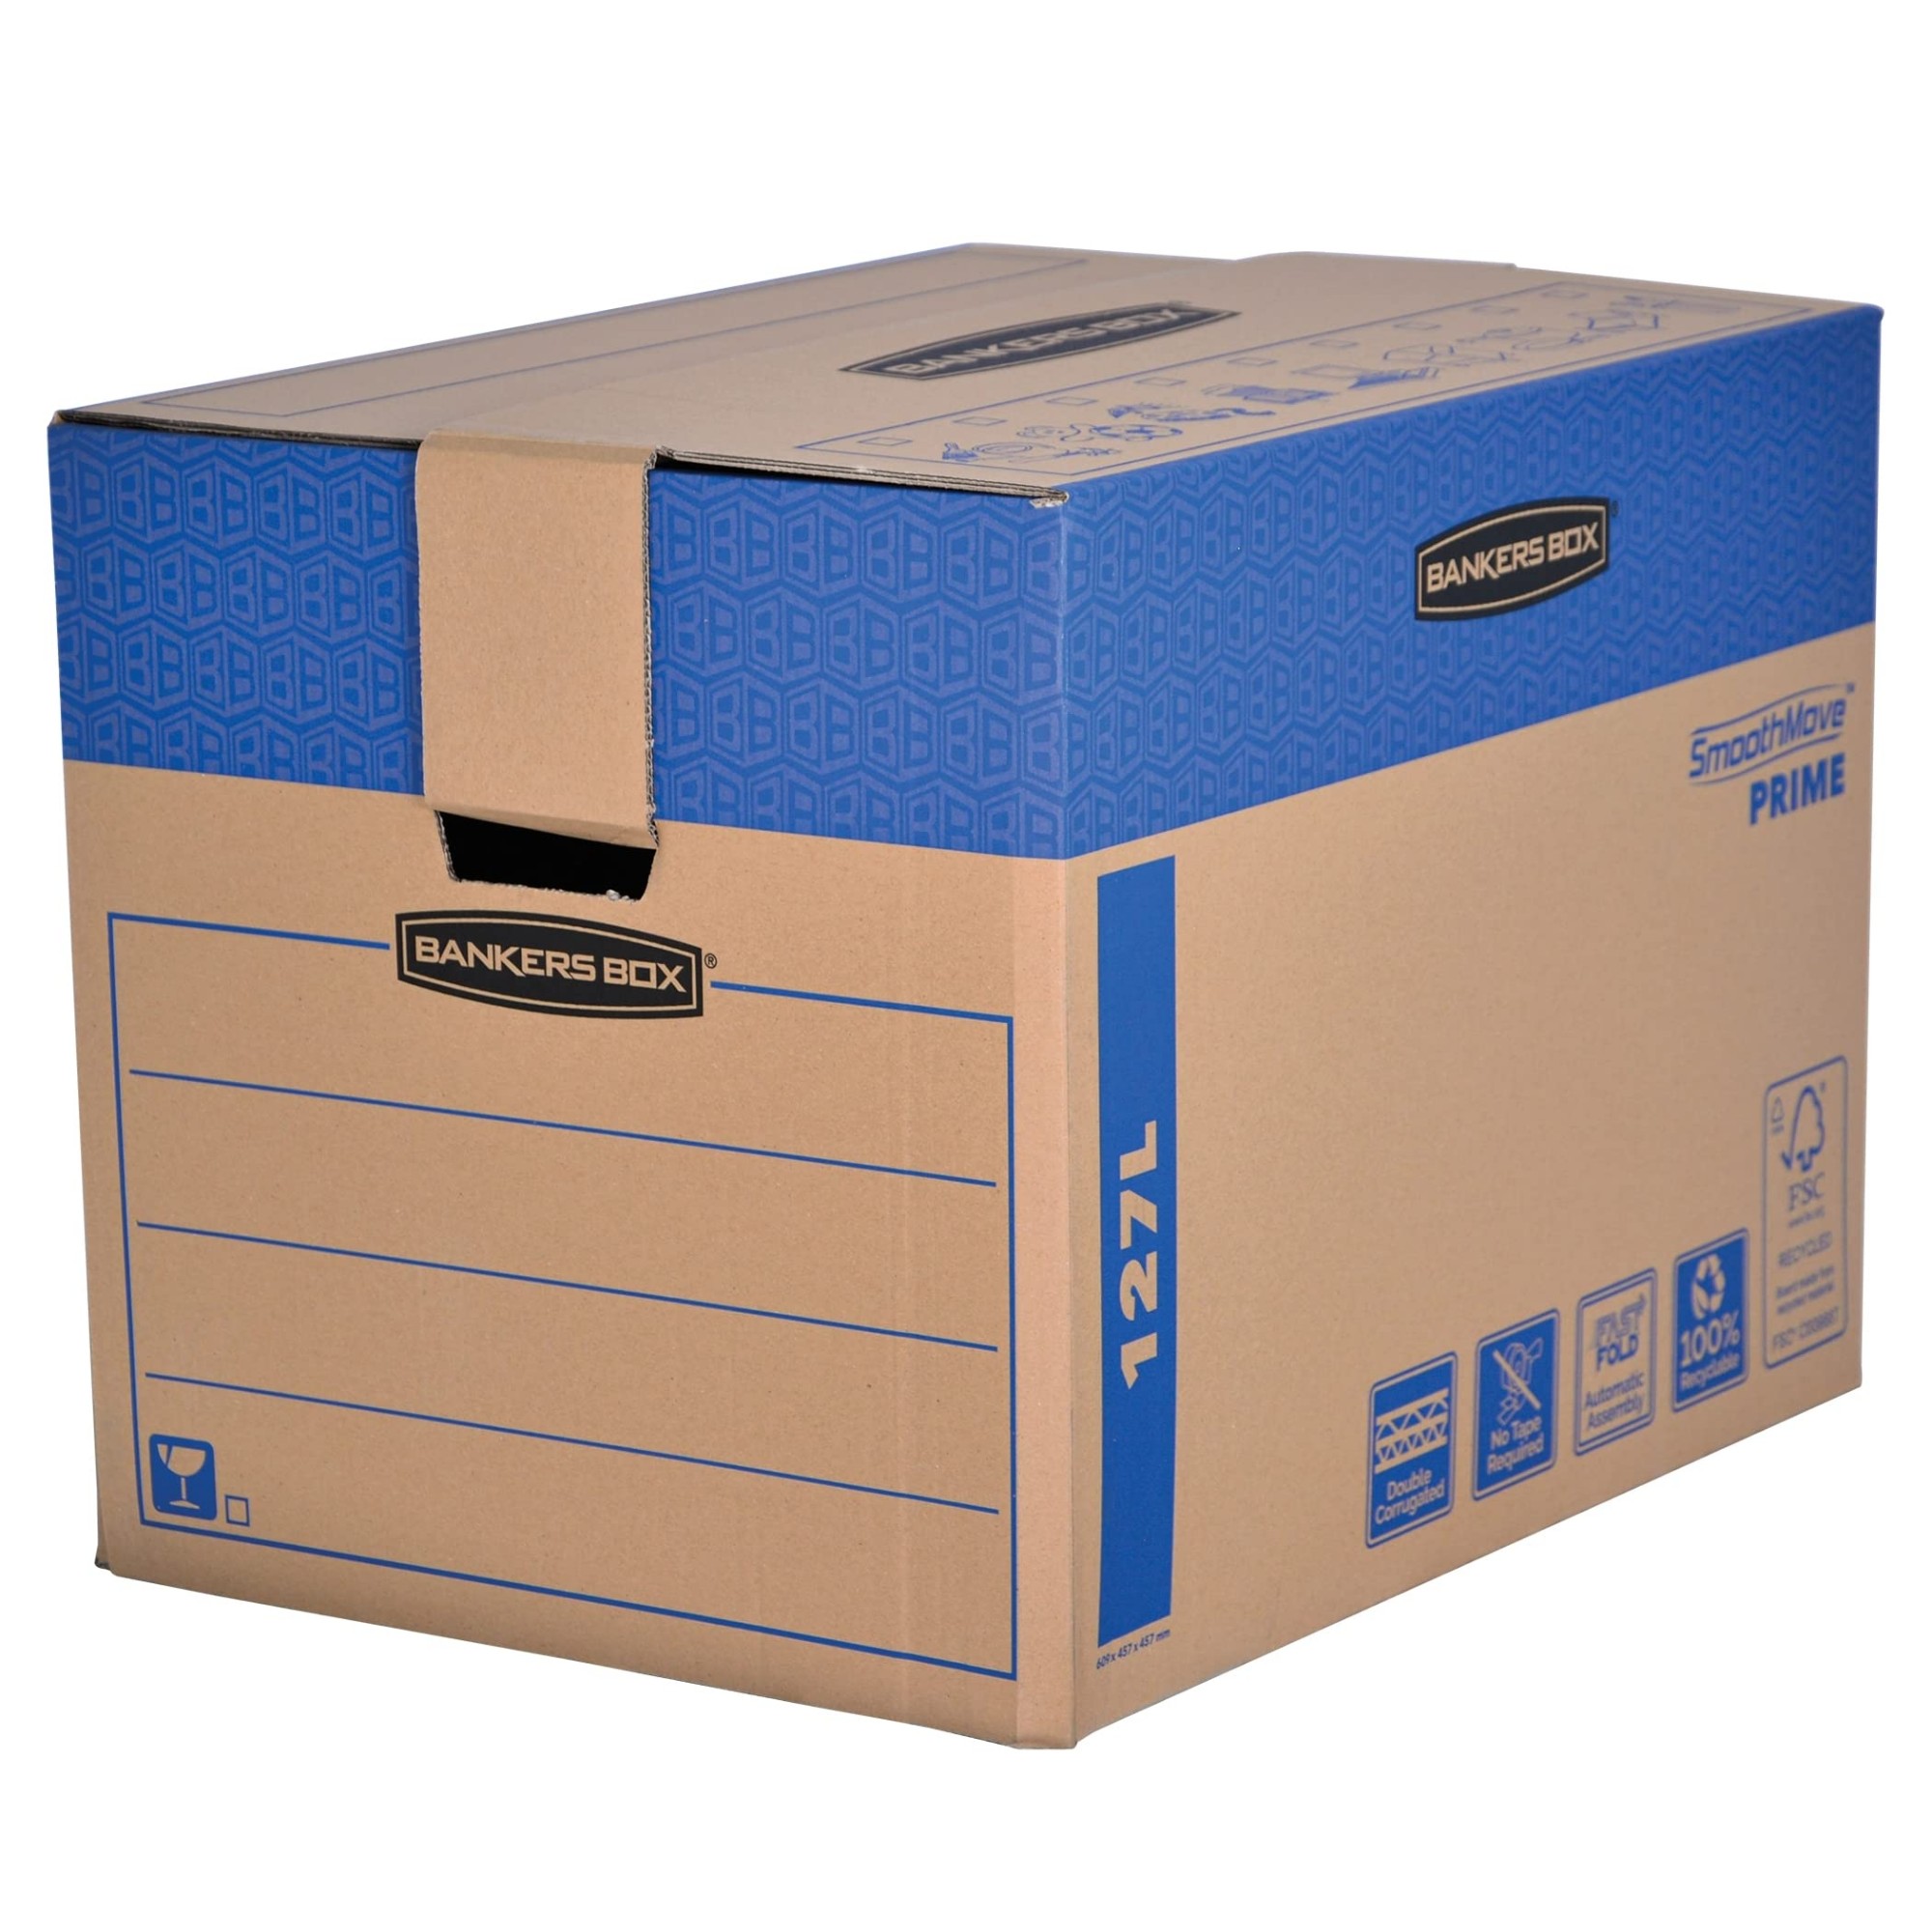 Fellowes Bankers SmoothMove Prime Box 127L XL Brown/Blue (Pack of 5) 6205401